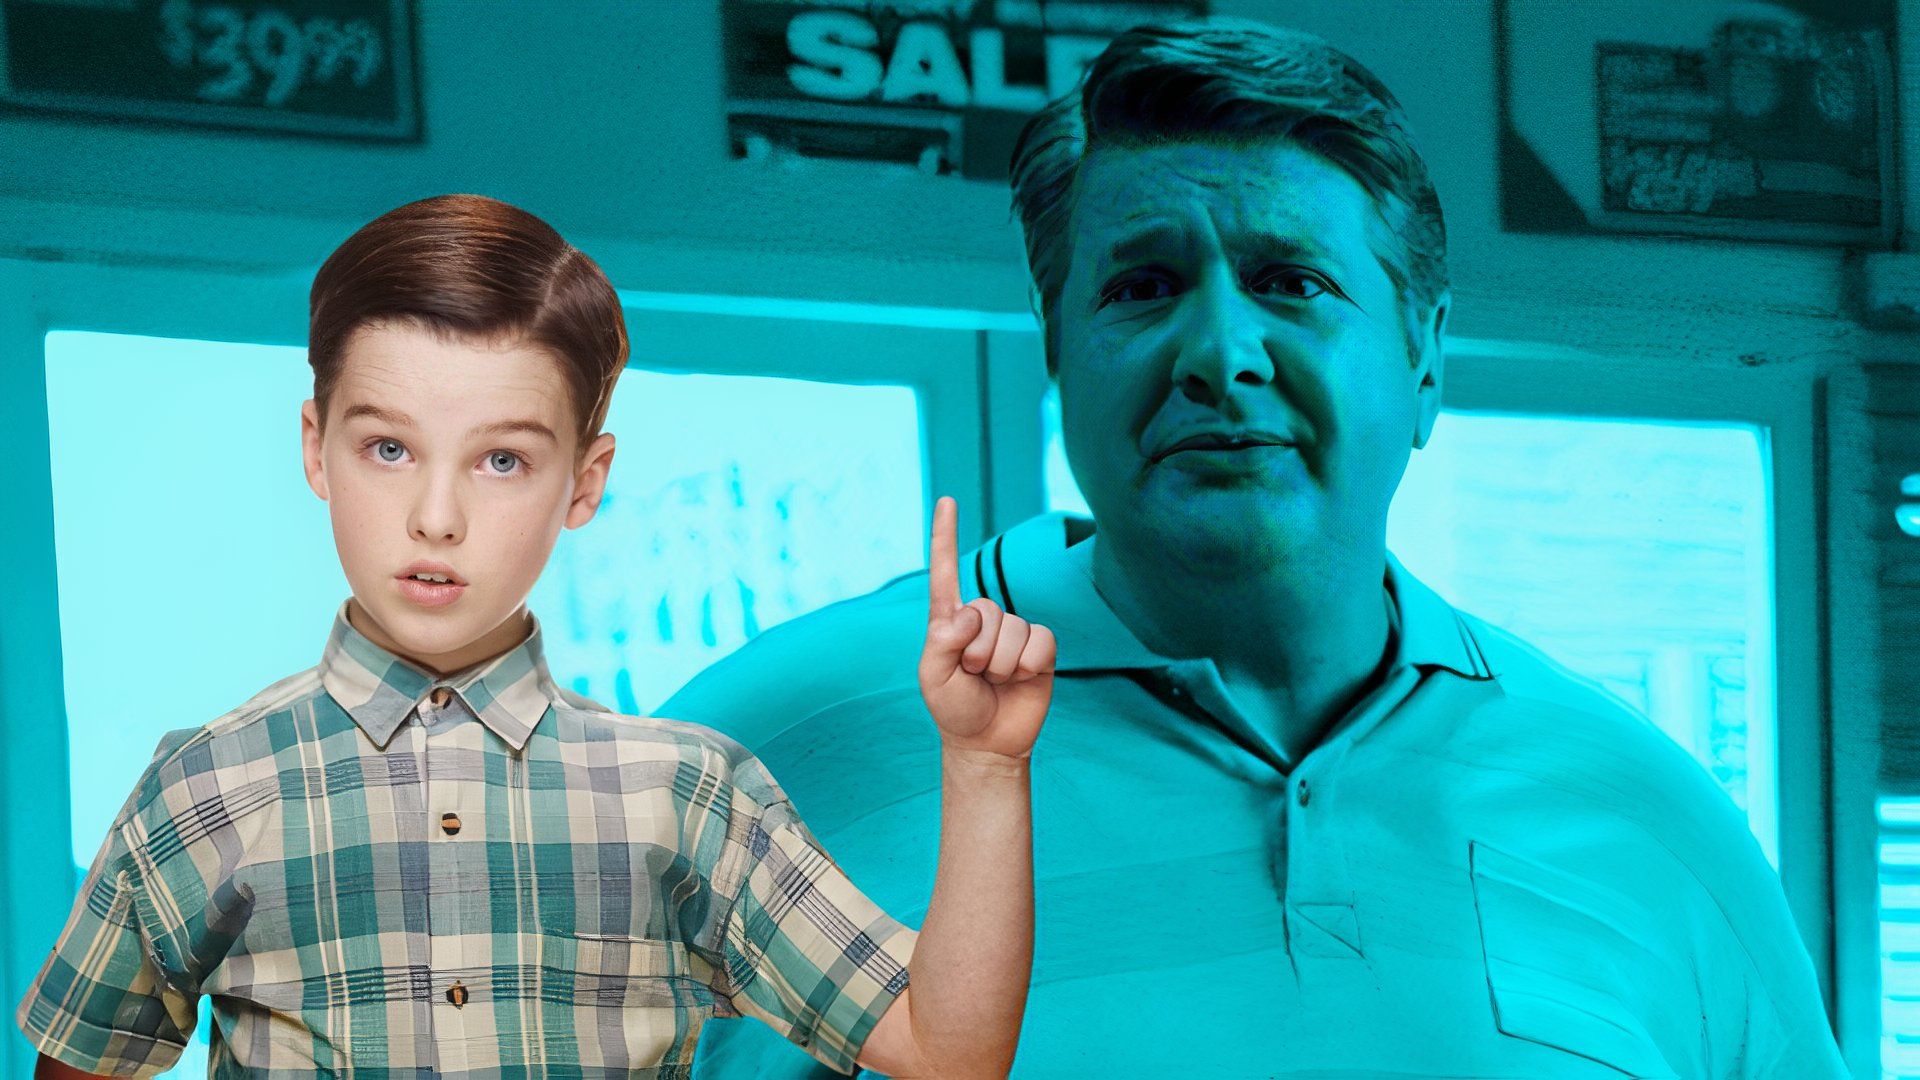 An edited image of Iain Armitage as Sheldon Cooper alongside Lance Barber as George Cooper in Young Sheldon